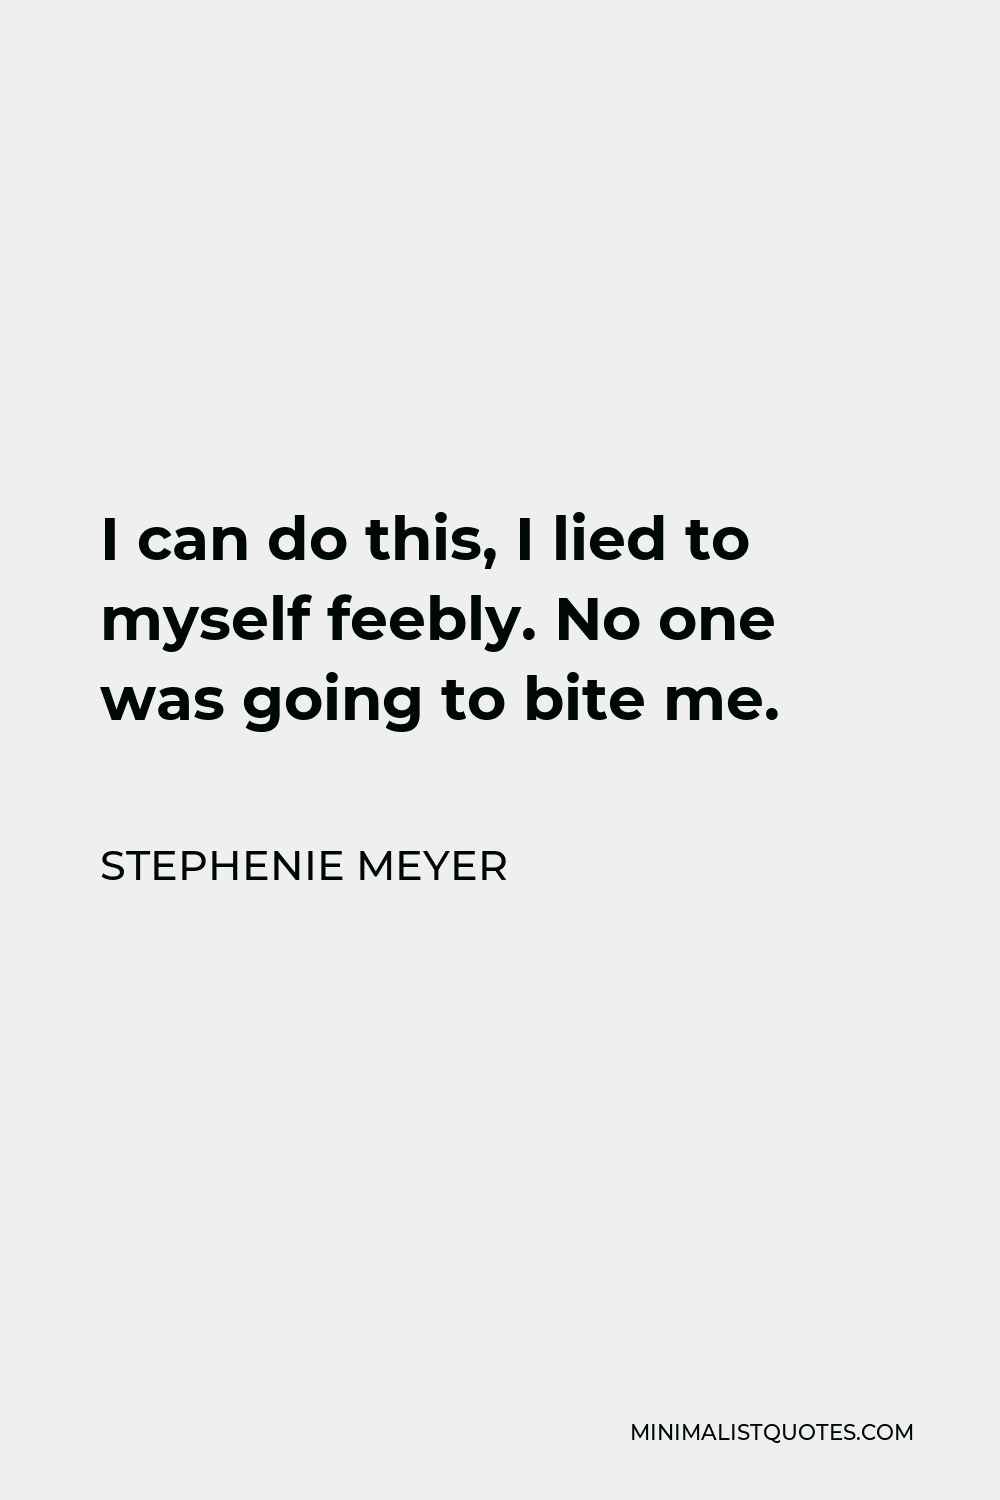 Stephenie Meyer Quote - I can do this, I lied to myself feebly. No one was going to bite me.